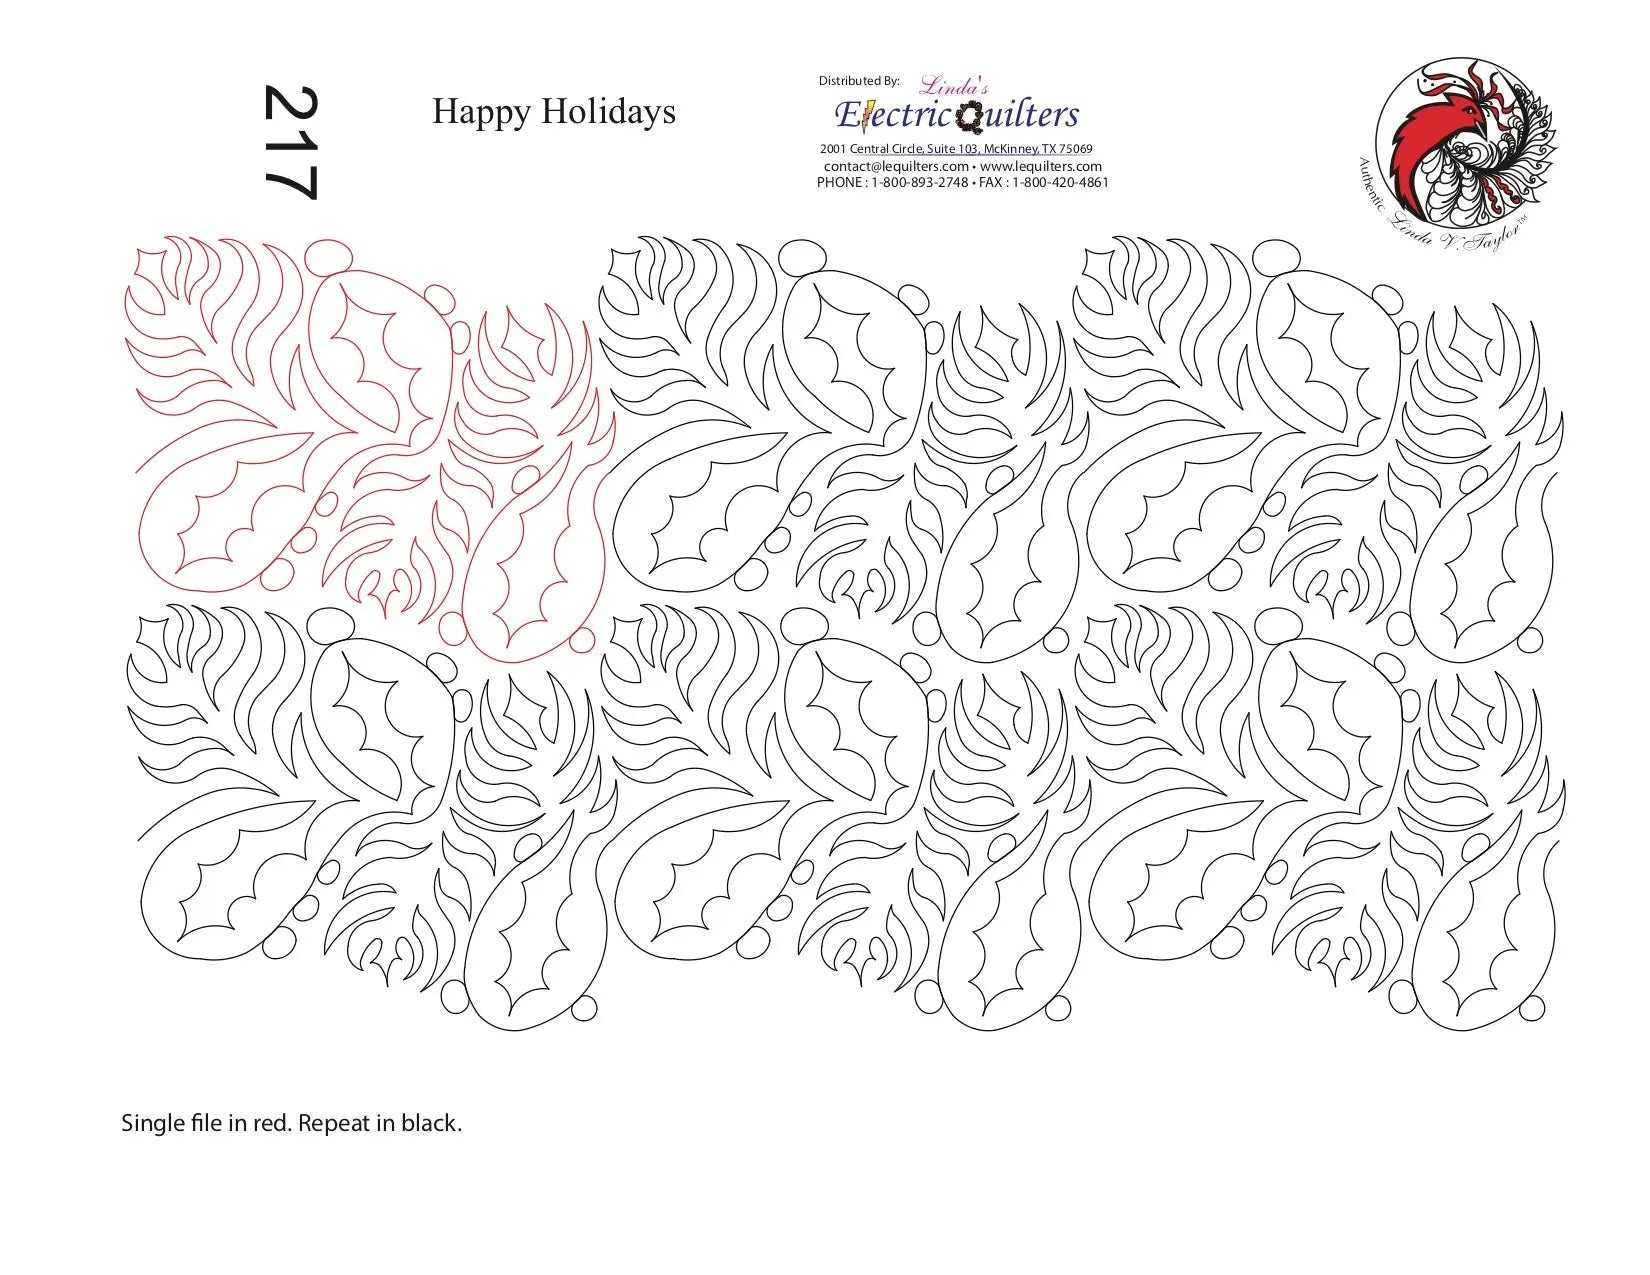 217 Happy Holidays Pantograph by Linda V. Taylor - Linda's Electric Quilters